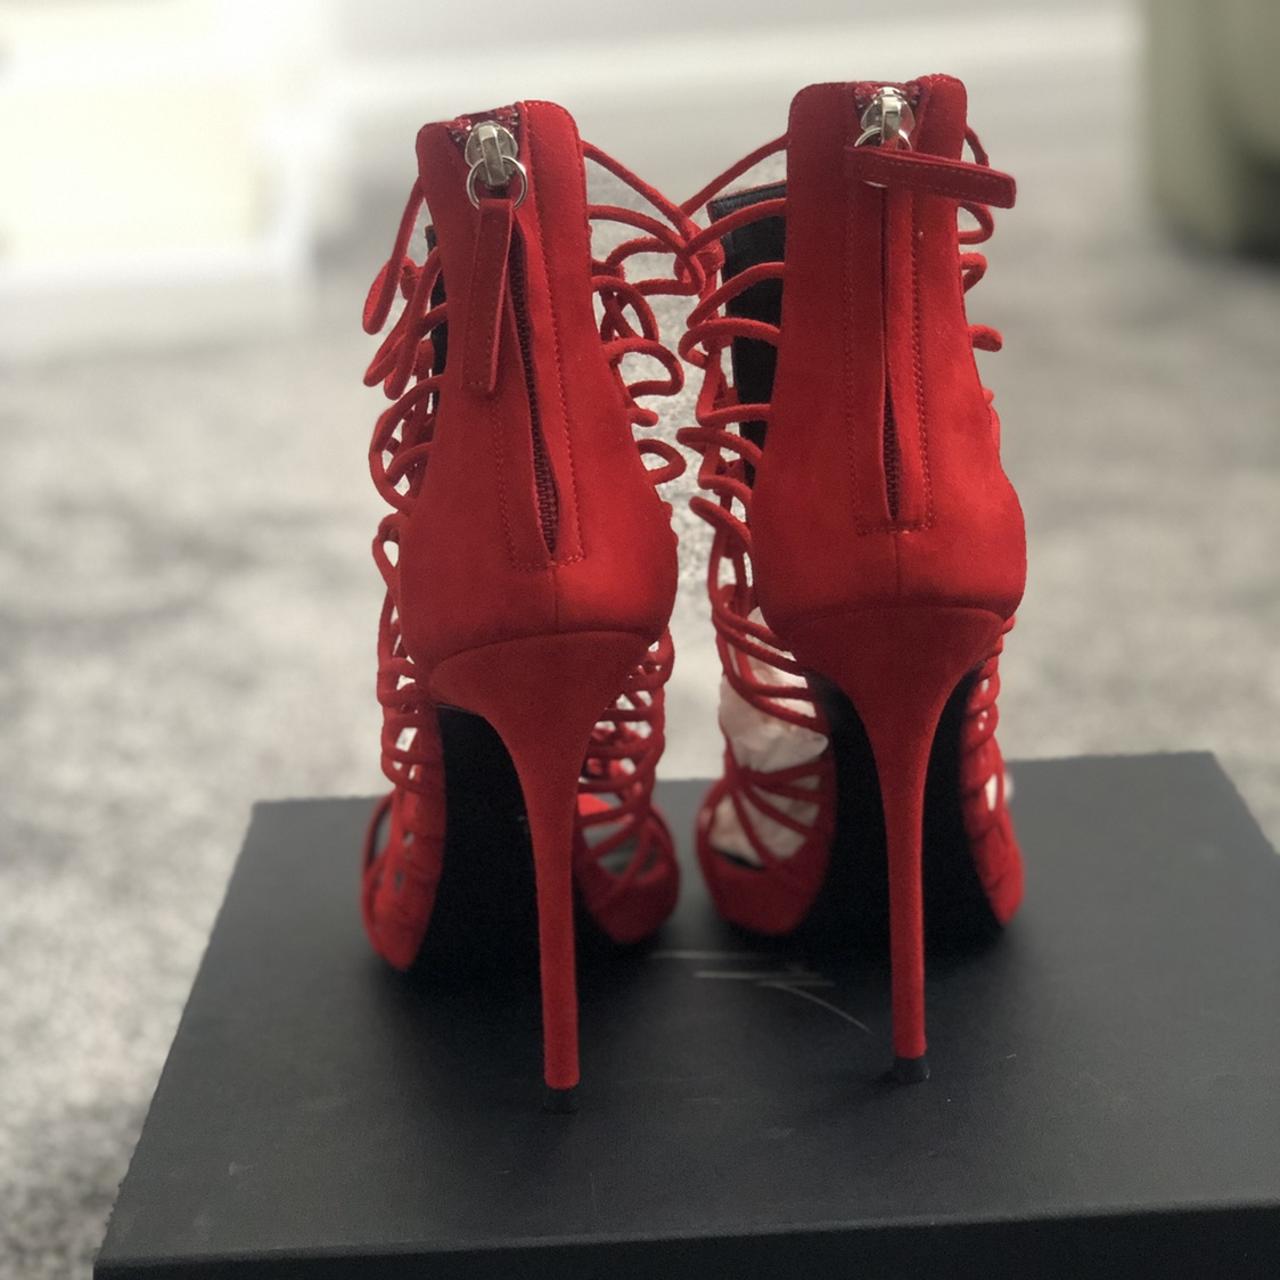 Red High Heels - Lopes & Sciannelli